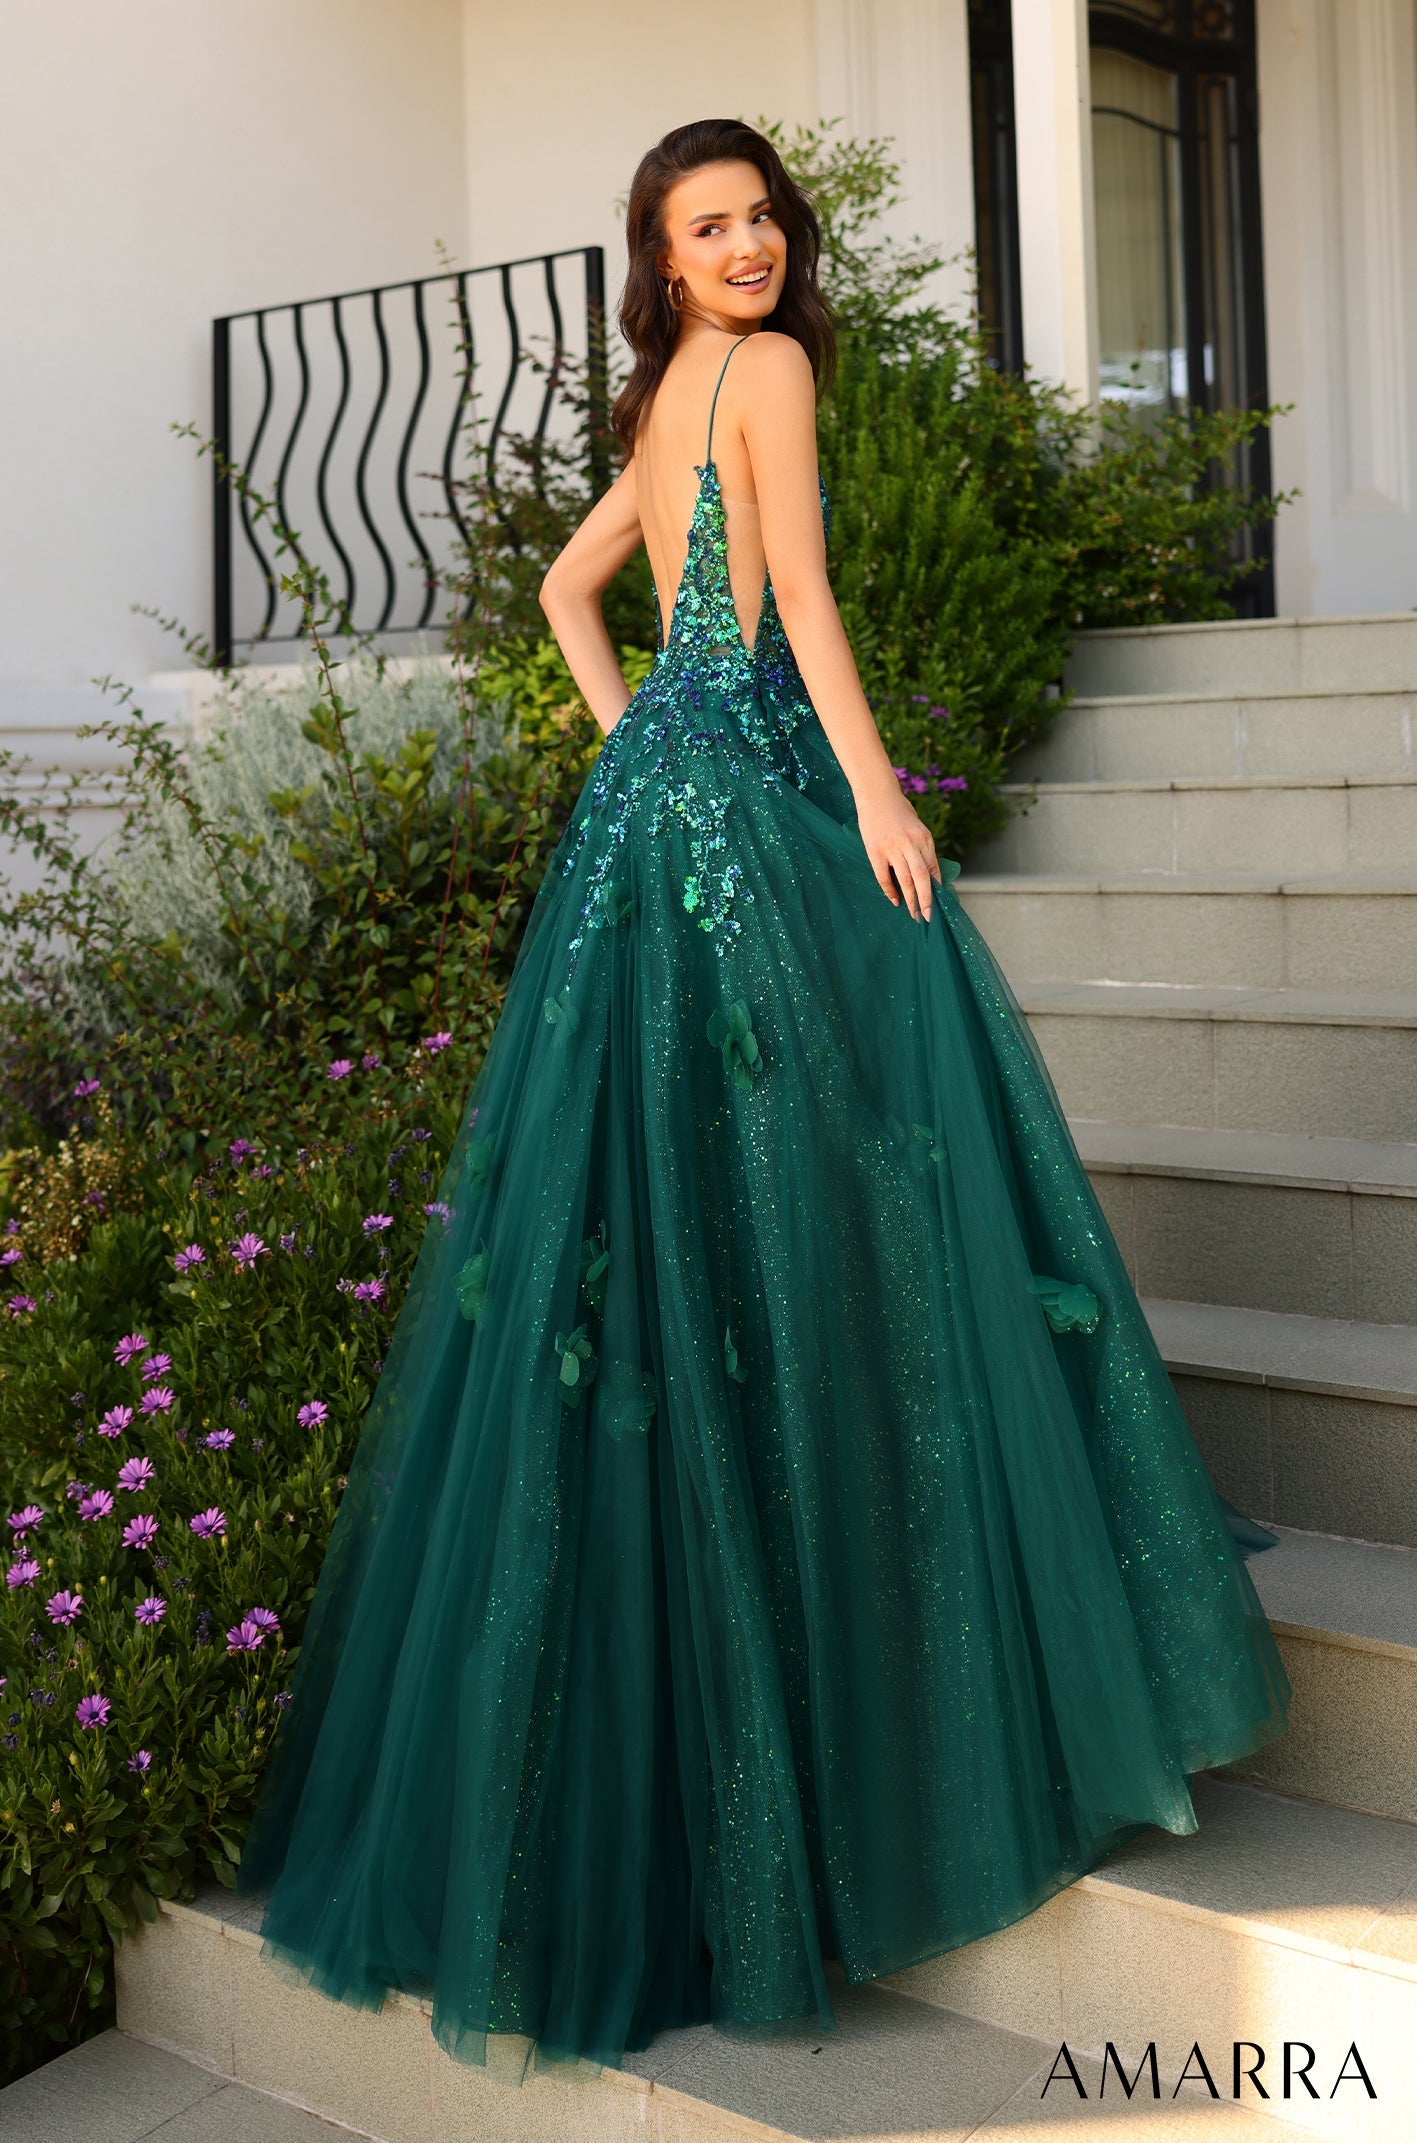 This Amarra 88857 dress is the perfect addition to any formal event. With a long, sheer sequin A-line cut, and a backless design, it's sure to turn heads. The elegant and sophisticated style will make you stand out in any pageant or prom. This sparkling A-line prom dress is a fairy tale dream come true!